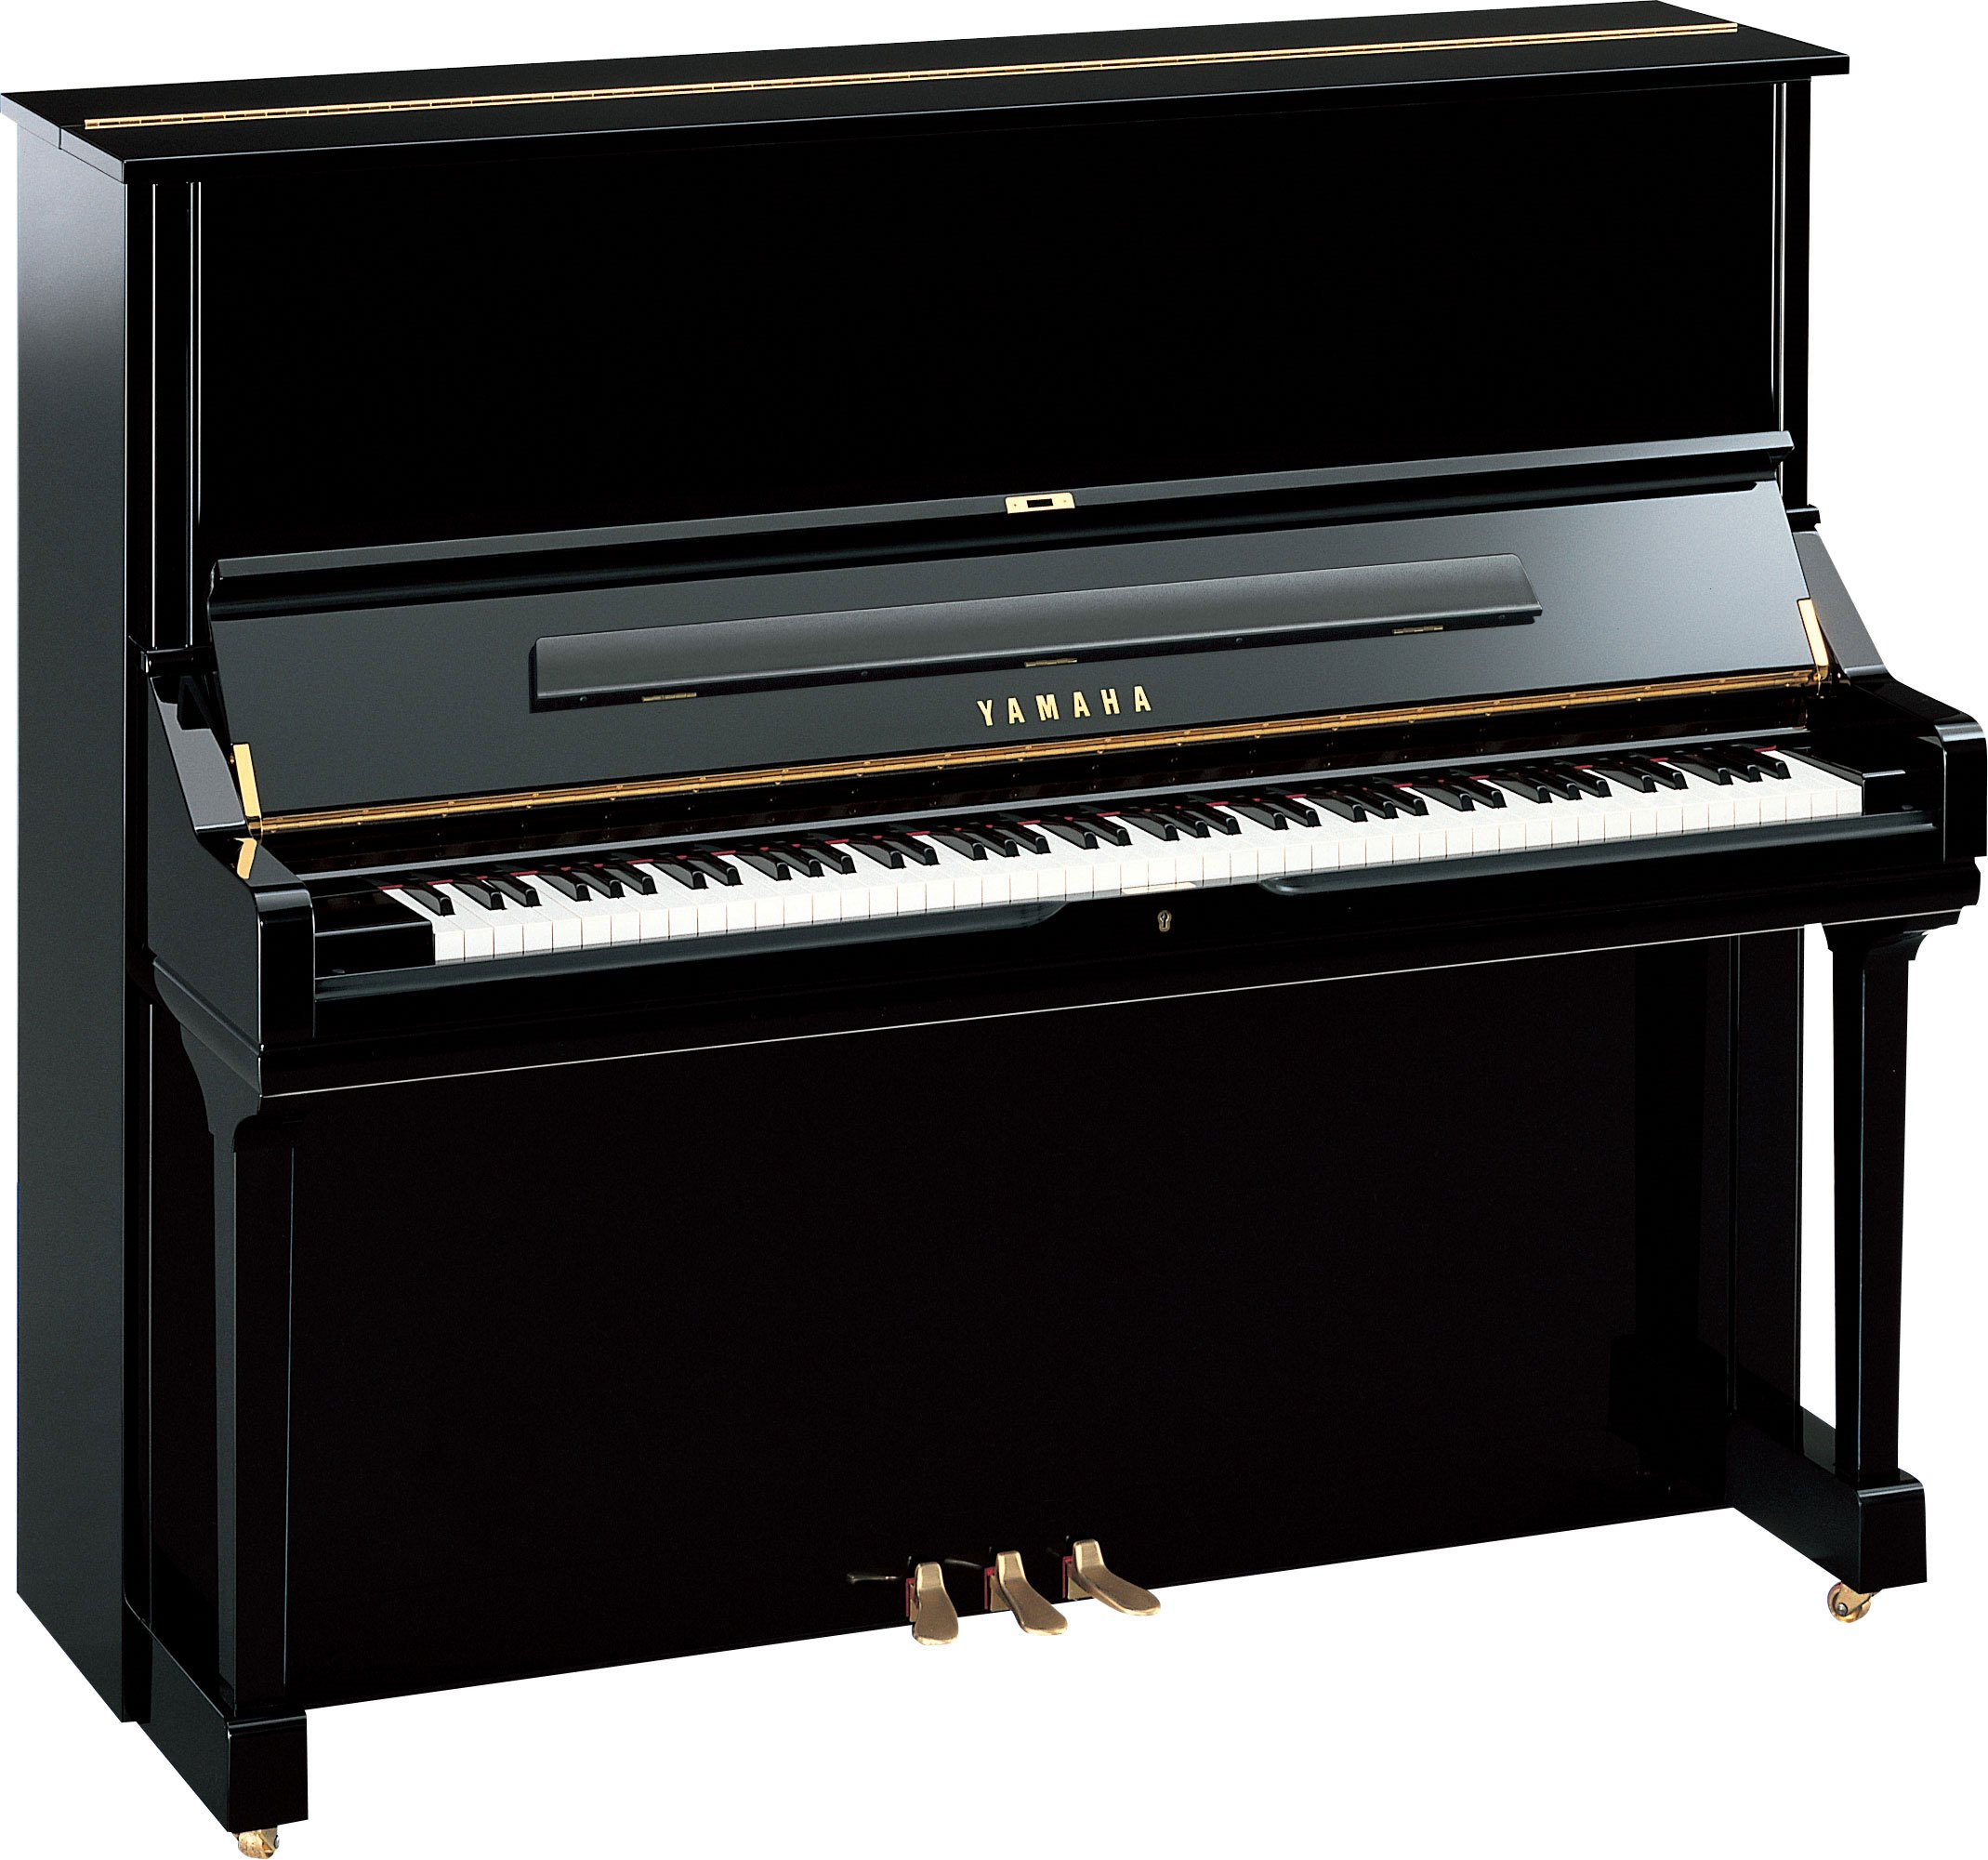 U Series Overview Upright Pianos Pianos Musical Instruments Products Yamaha United States